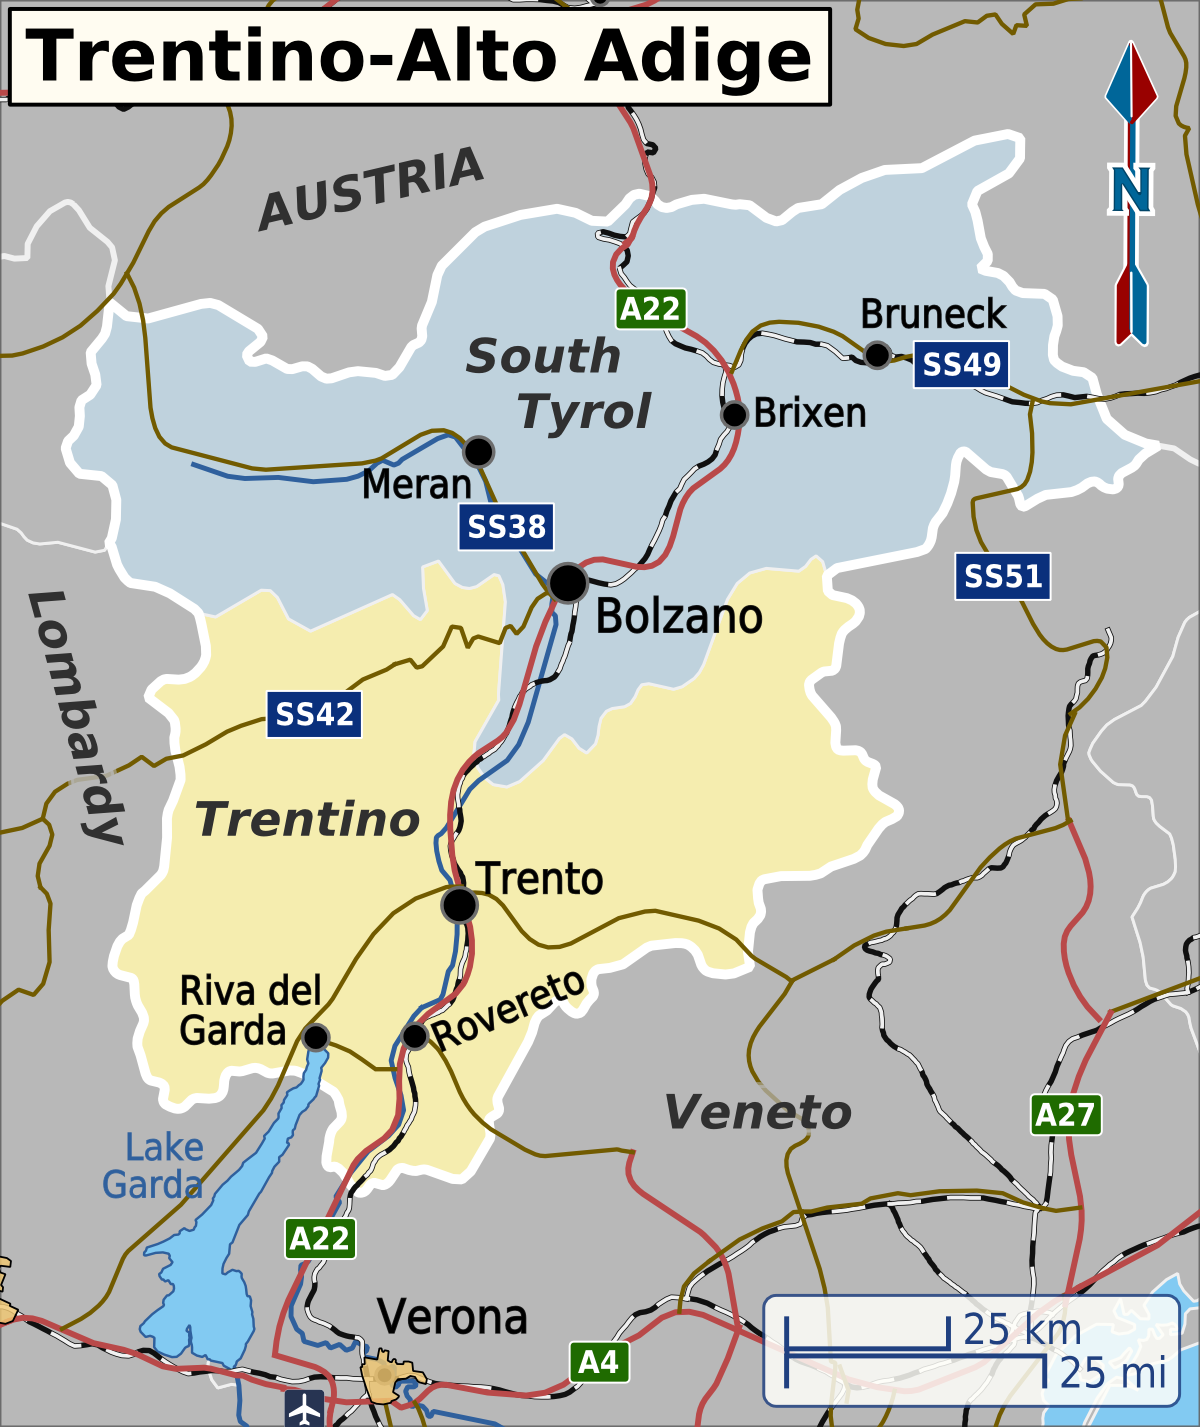 A detailed map and routes of Trentino Alto Adige Regions